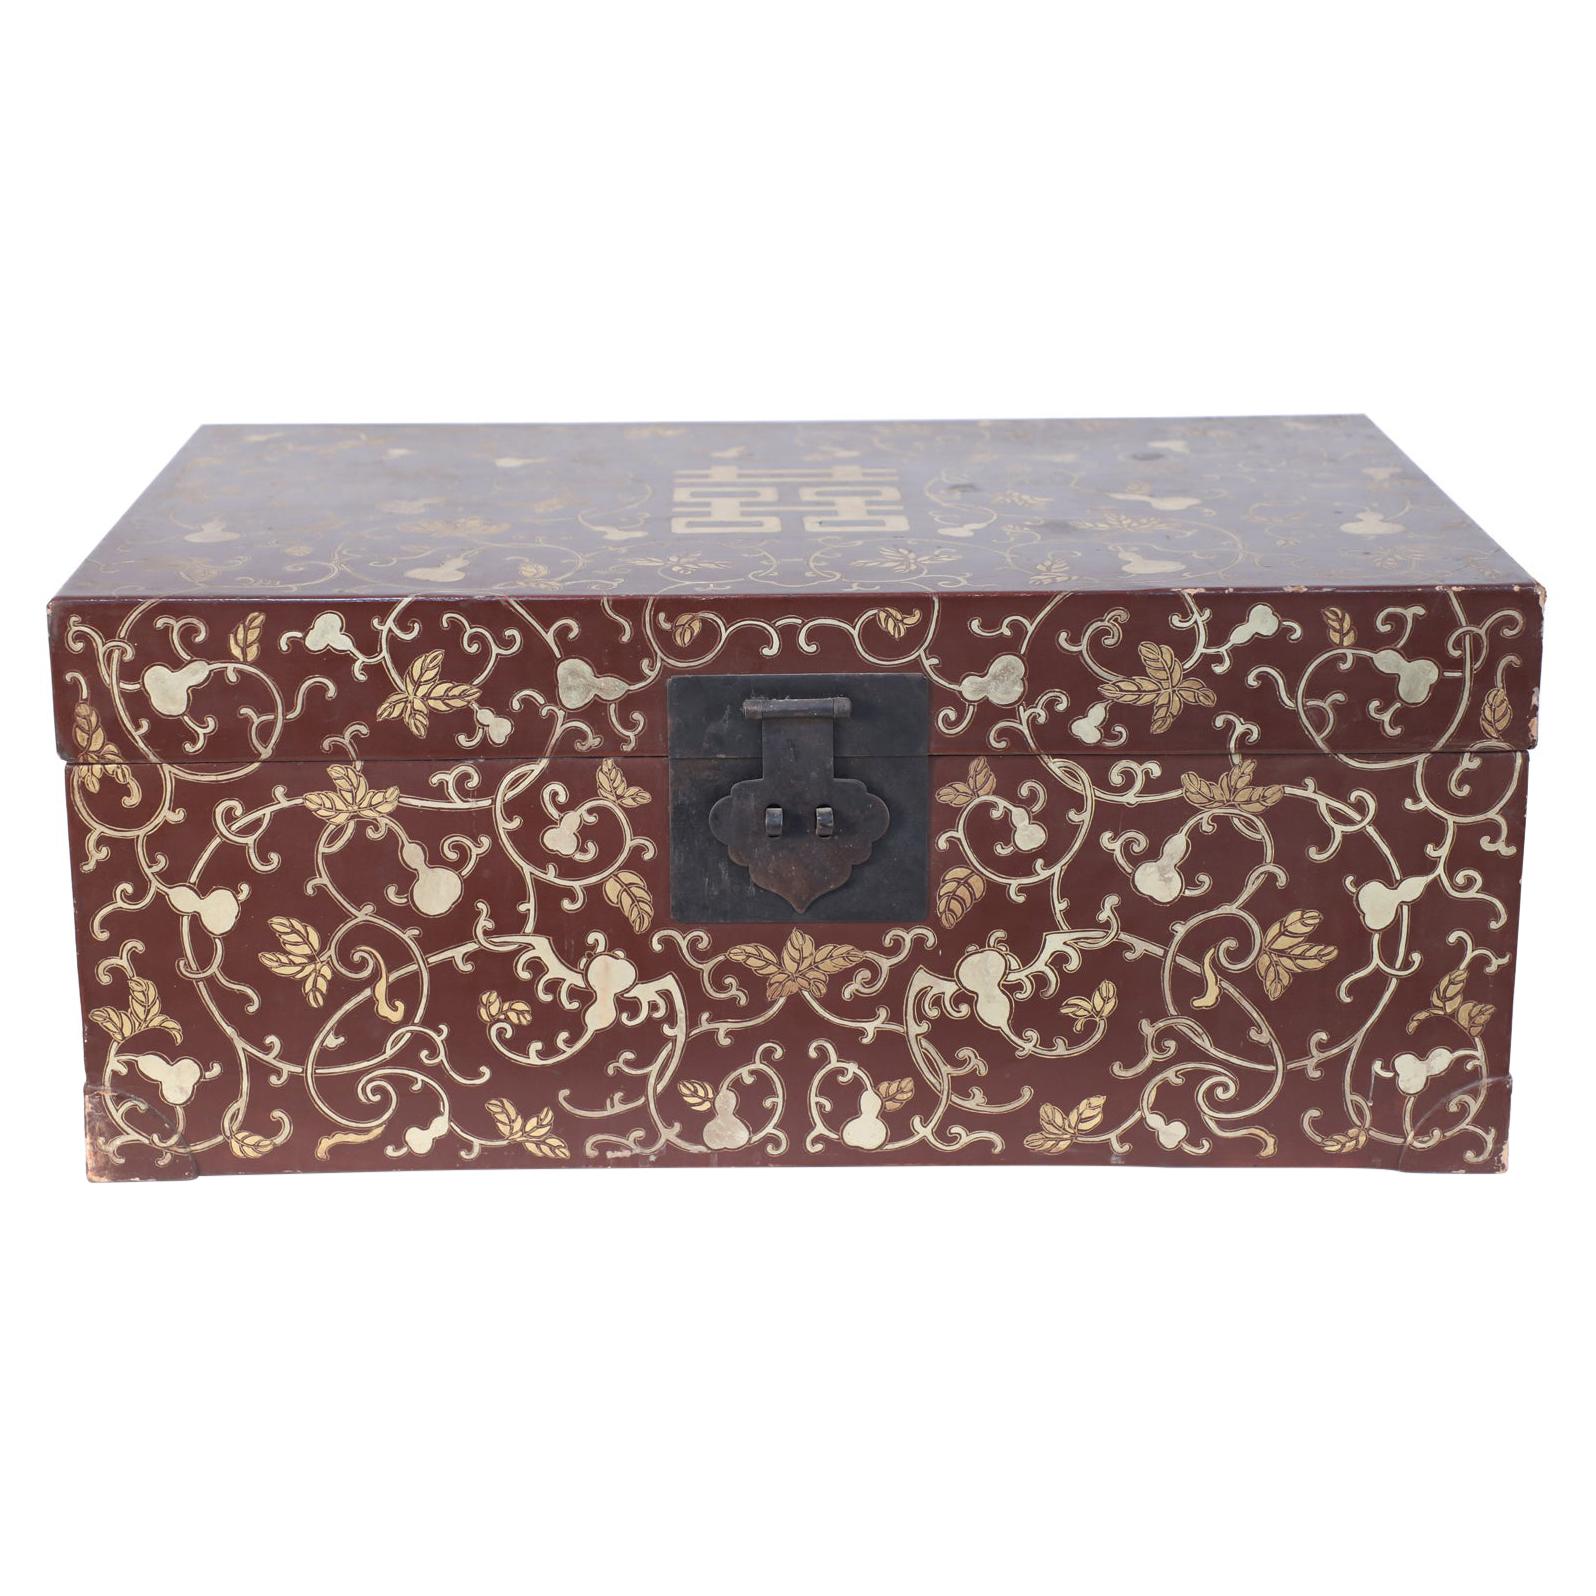 Chinese Burgundy and Gold Vine Design Painted Decorative Box